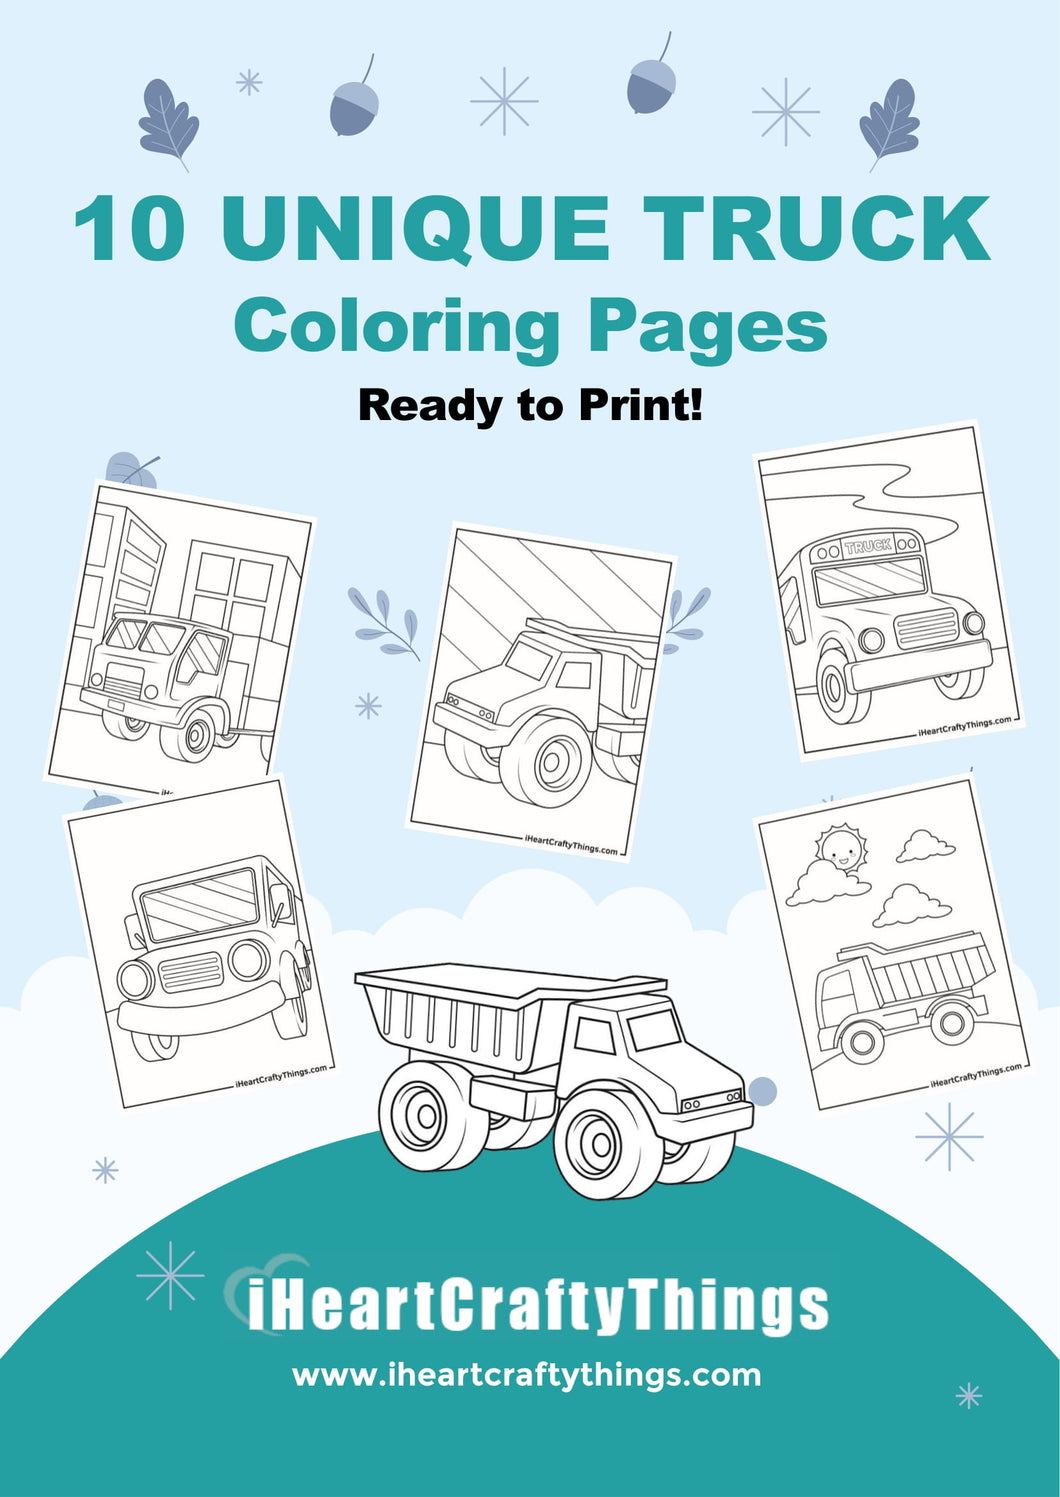 10 TRUCK COLORING PAGES